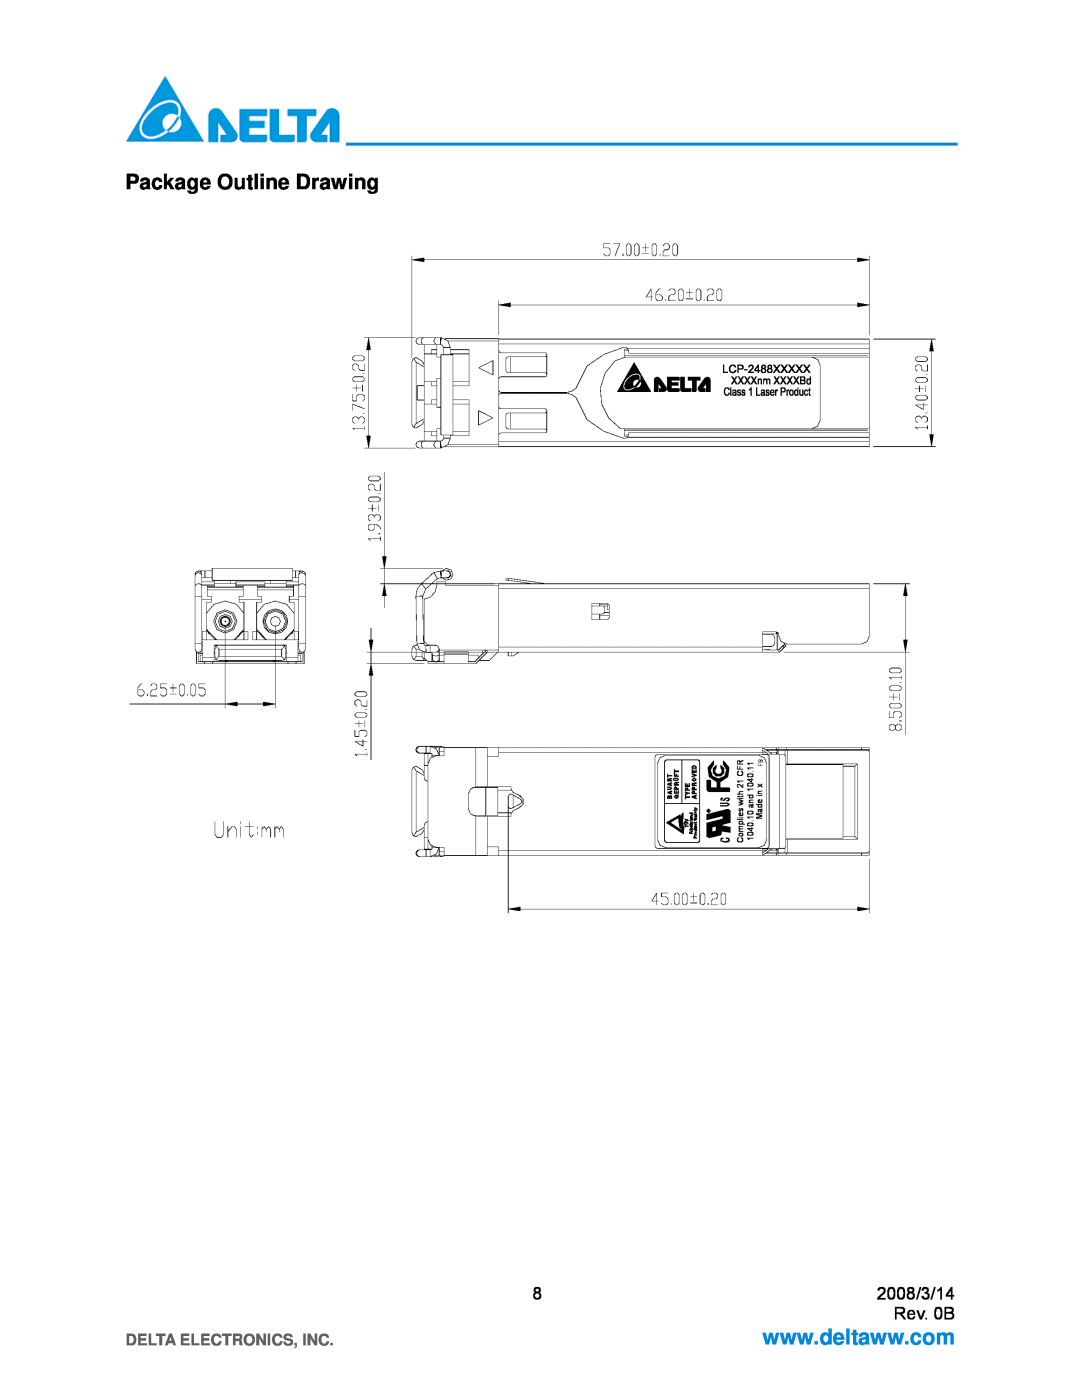 Delta Electronics LCP-2488B4HDRx manual Package Outline Drawing, Delta Electronics, Inc 